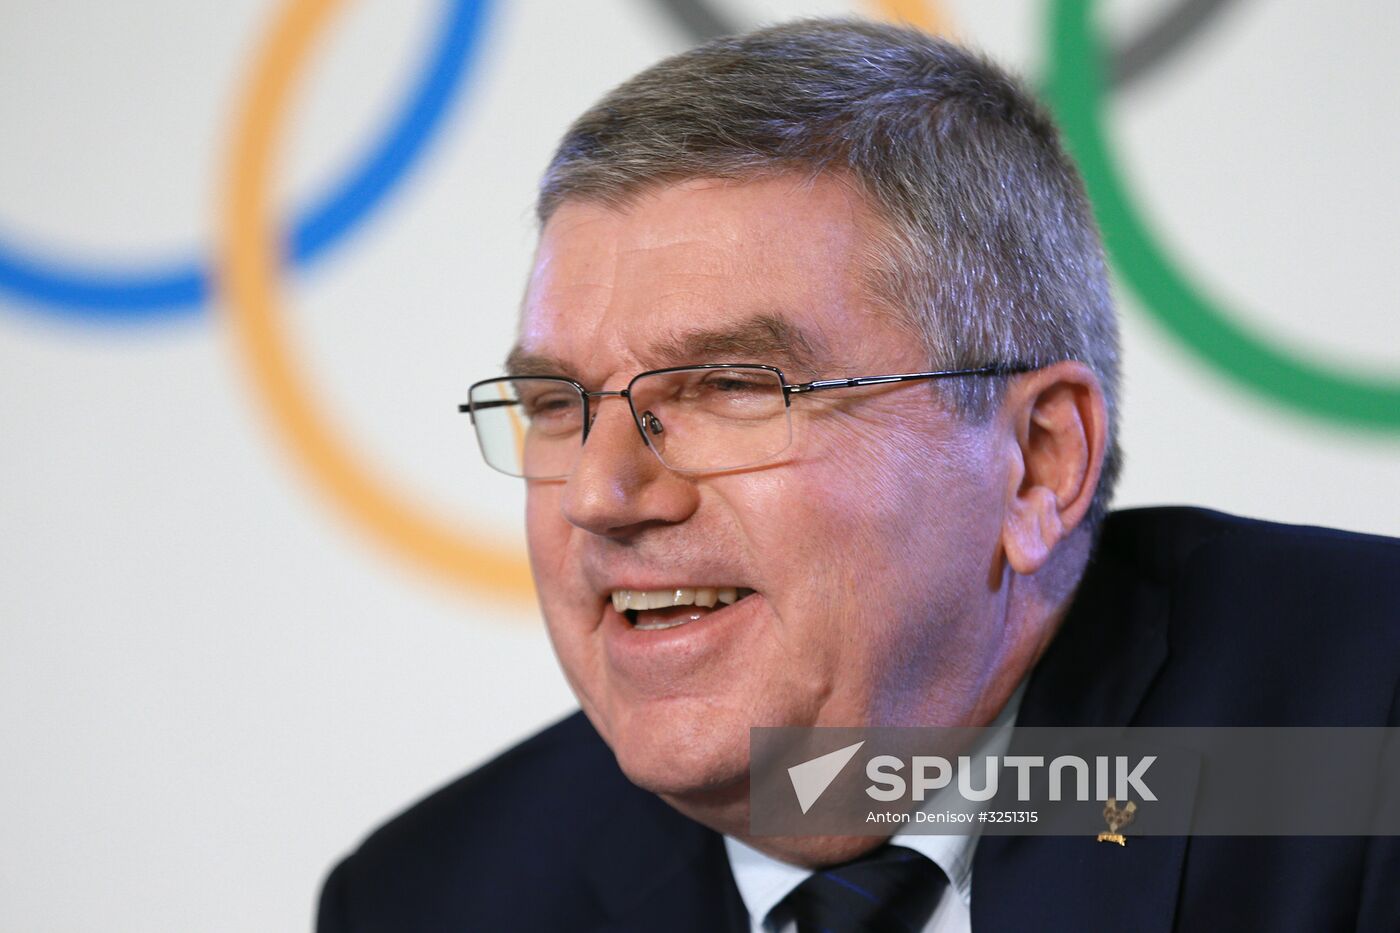 Meeting of Executive Board of International Olympic Committee